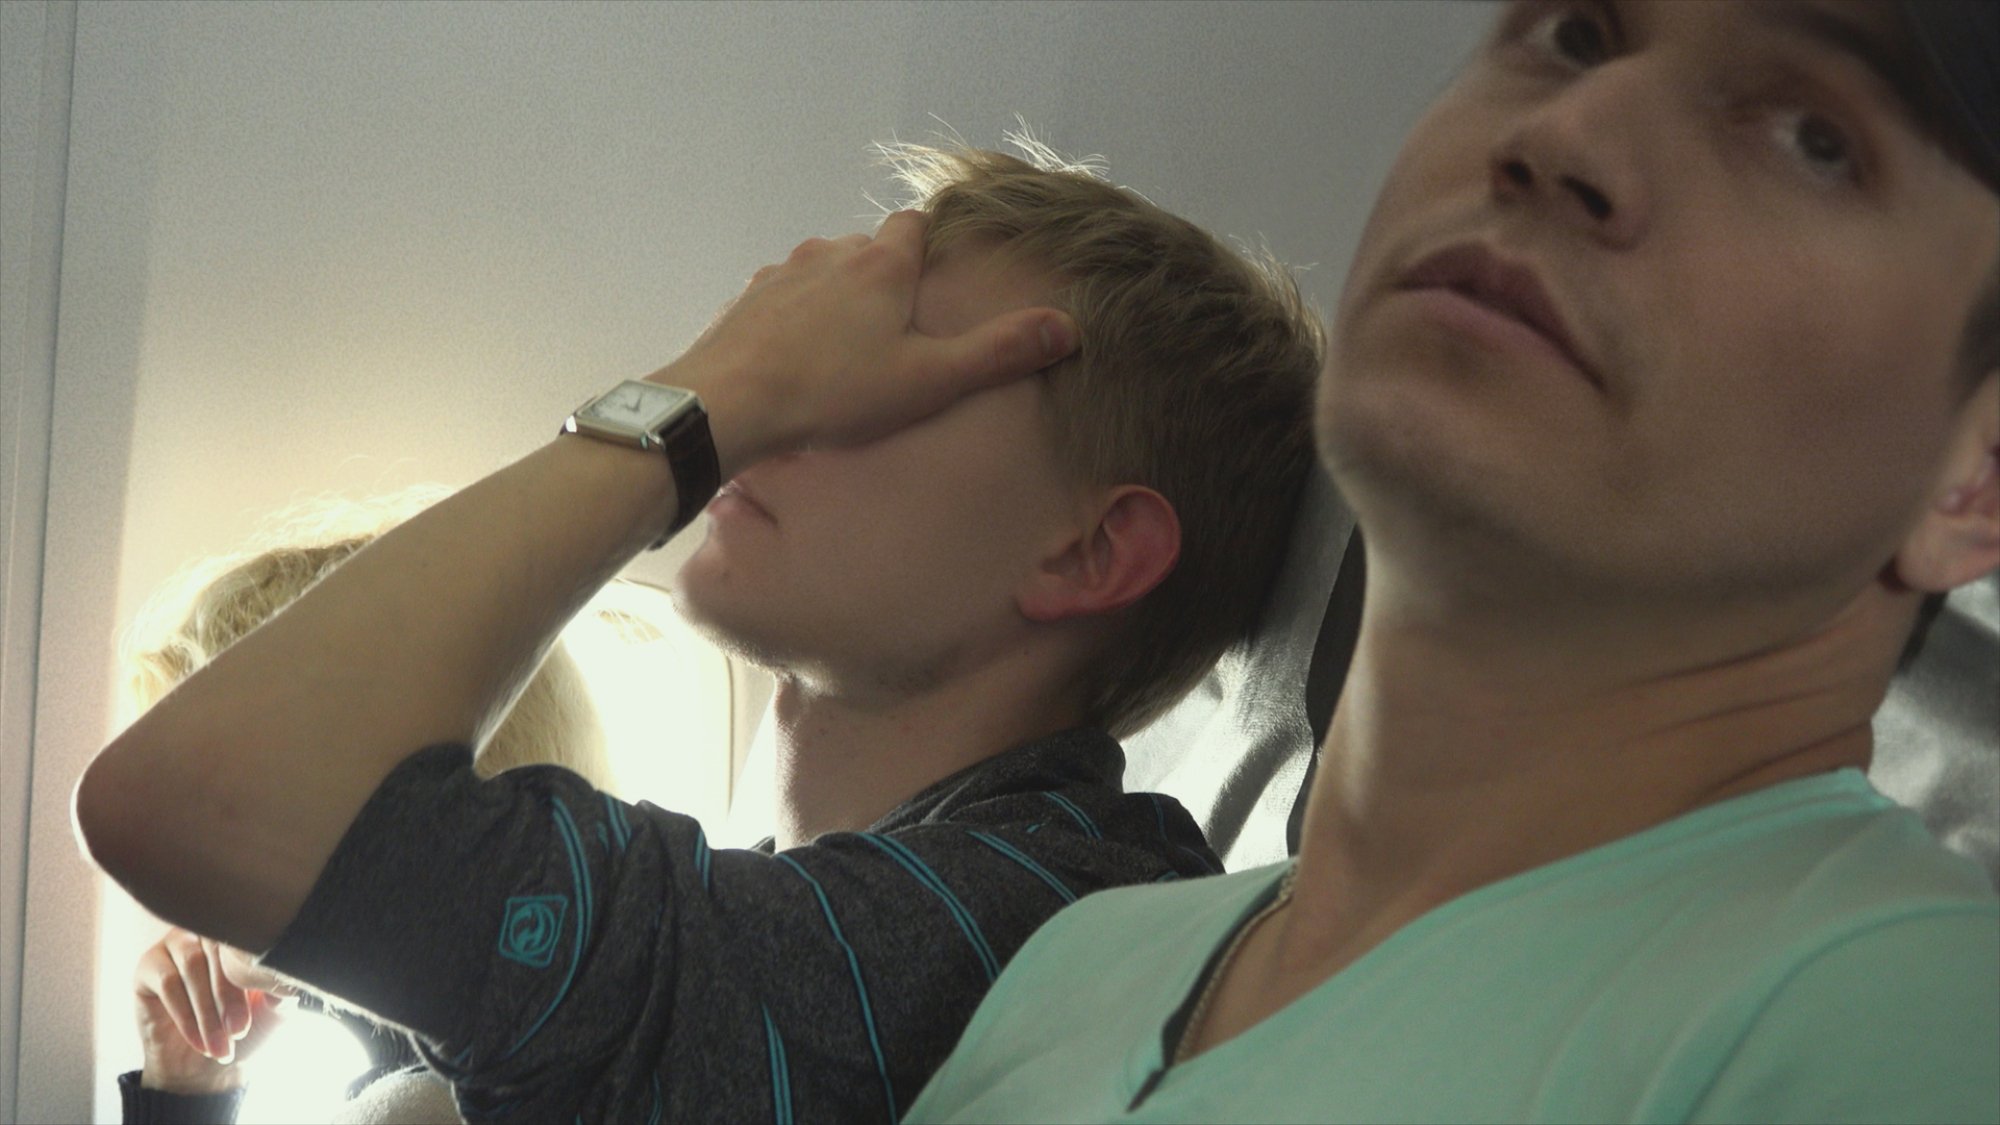 Two men seated on an airplane; one covers his face in worry.